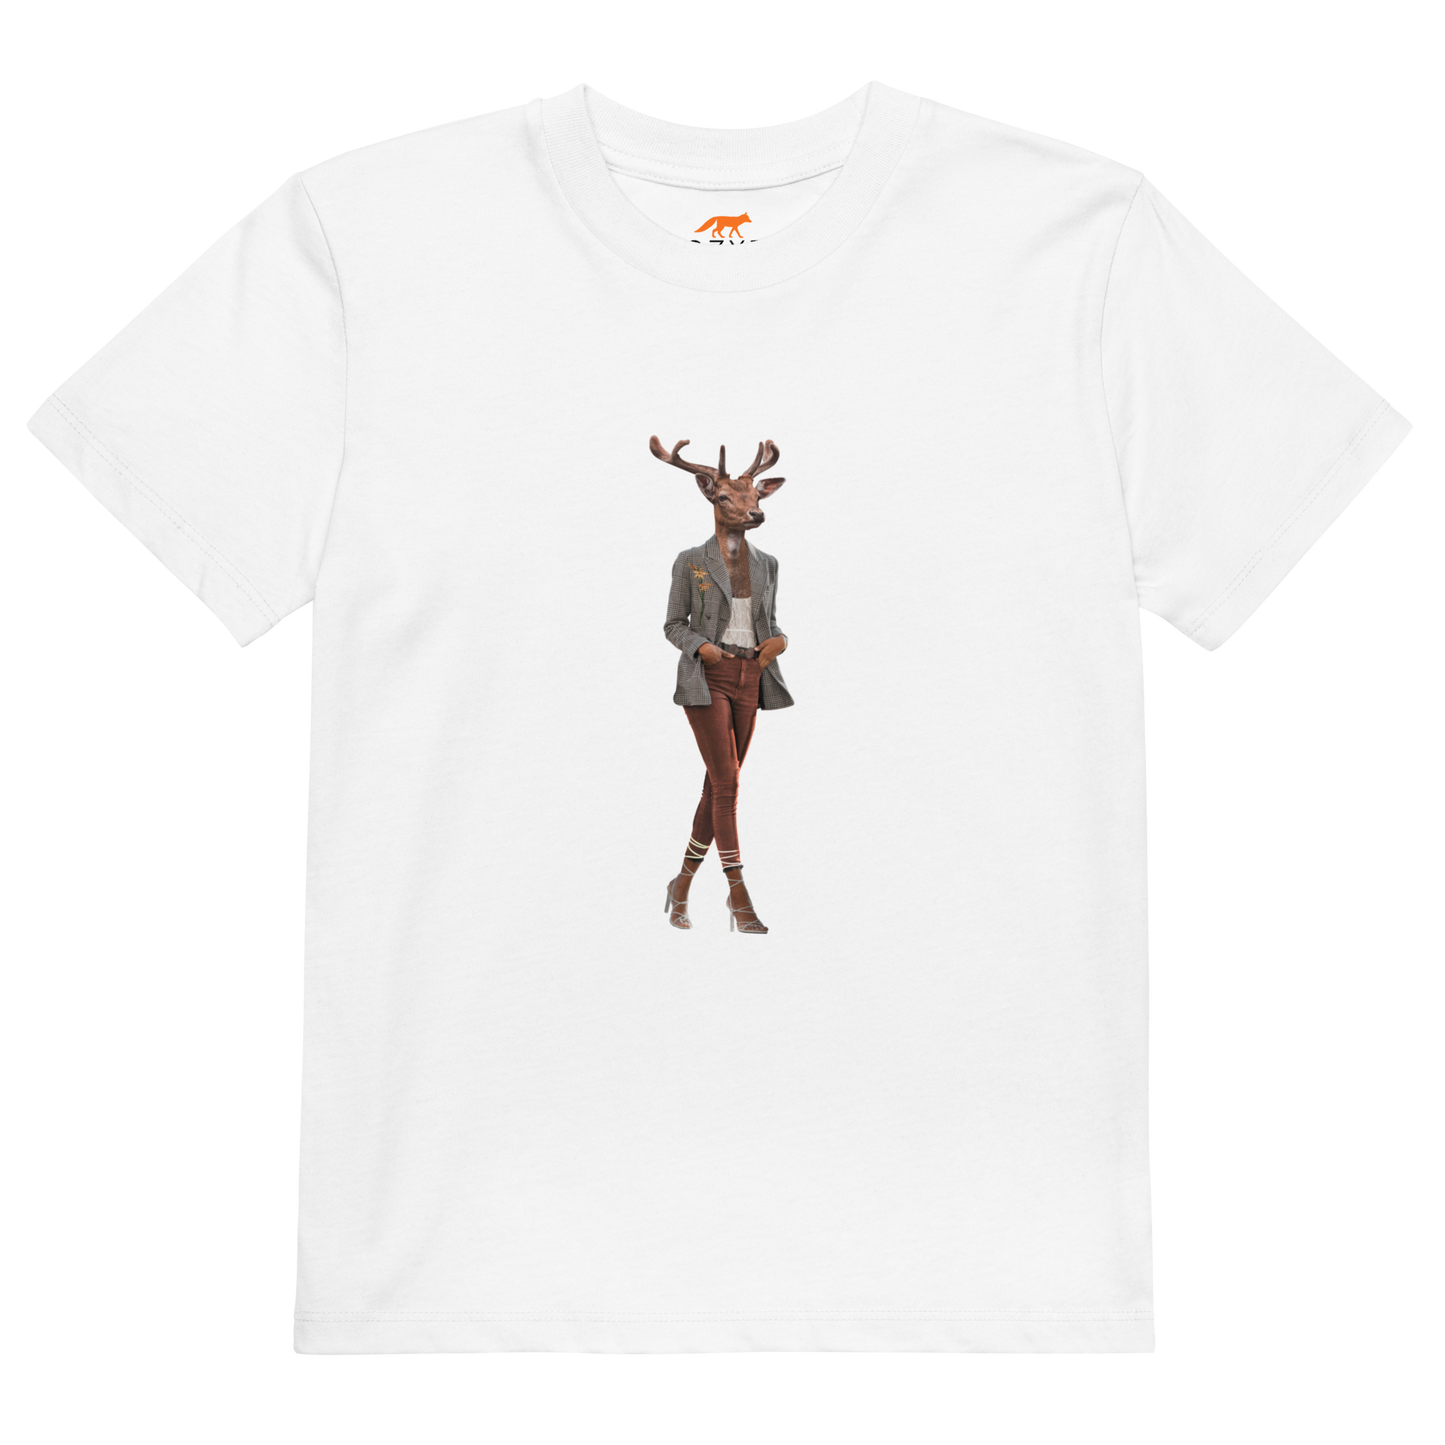 White Anthropomorphic Deer Organic Cotton Kids T-Shirt featuring an Anthropomorphic Deer graphic on the chest - Kids' Graphic Tees - Funny Animal T-Shirts - Boozy Fox